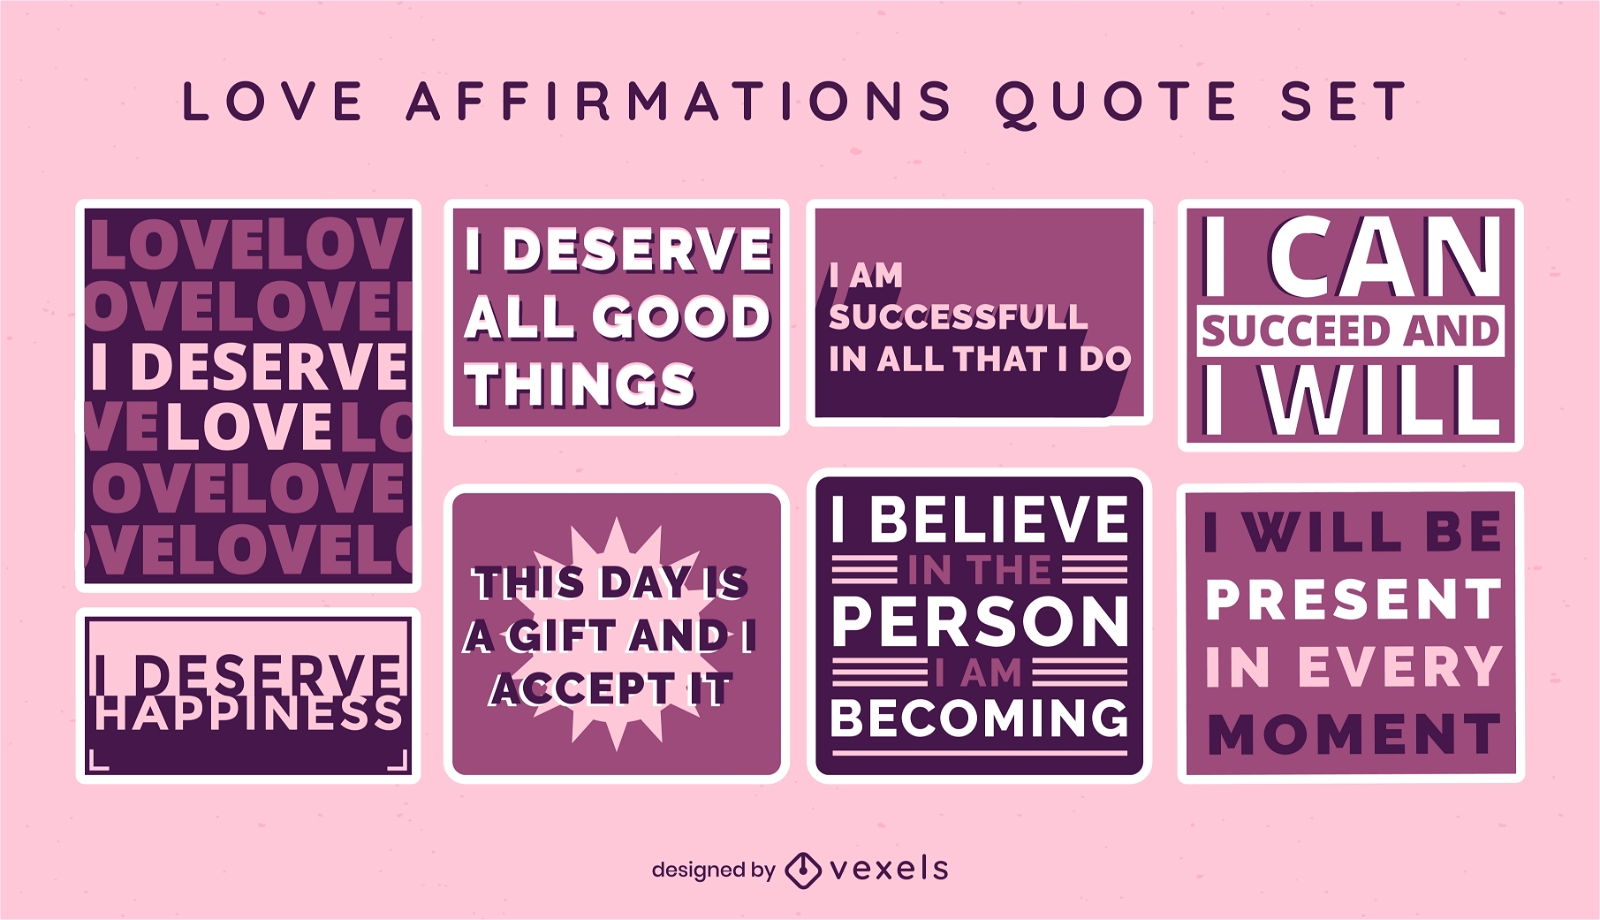 Love affirmations quote set